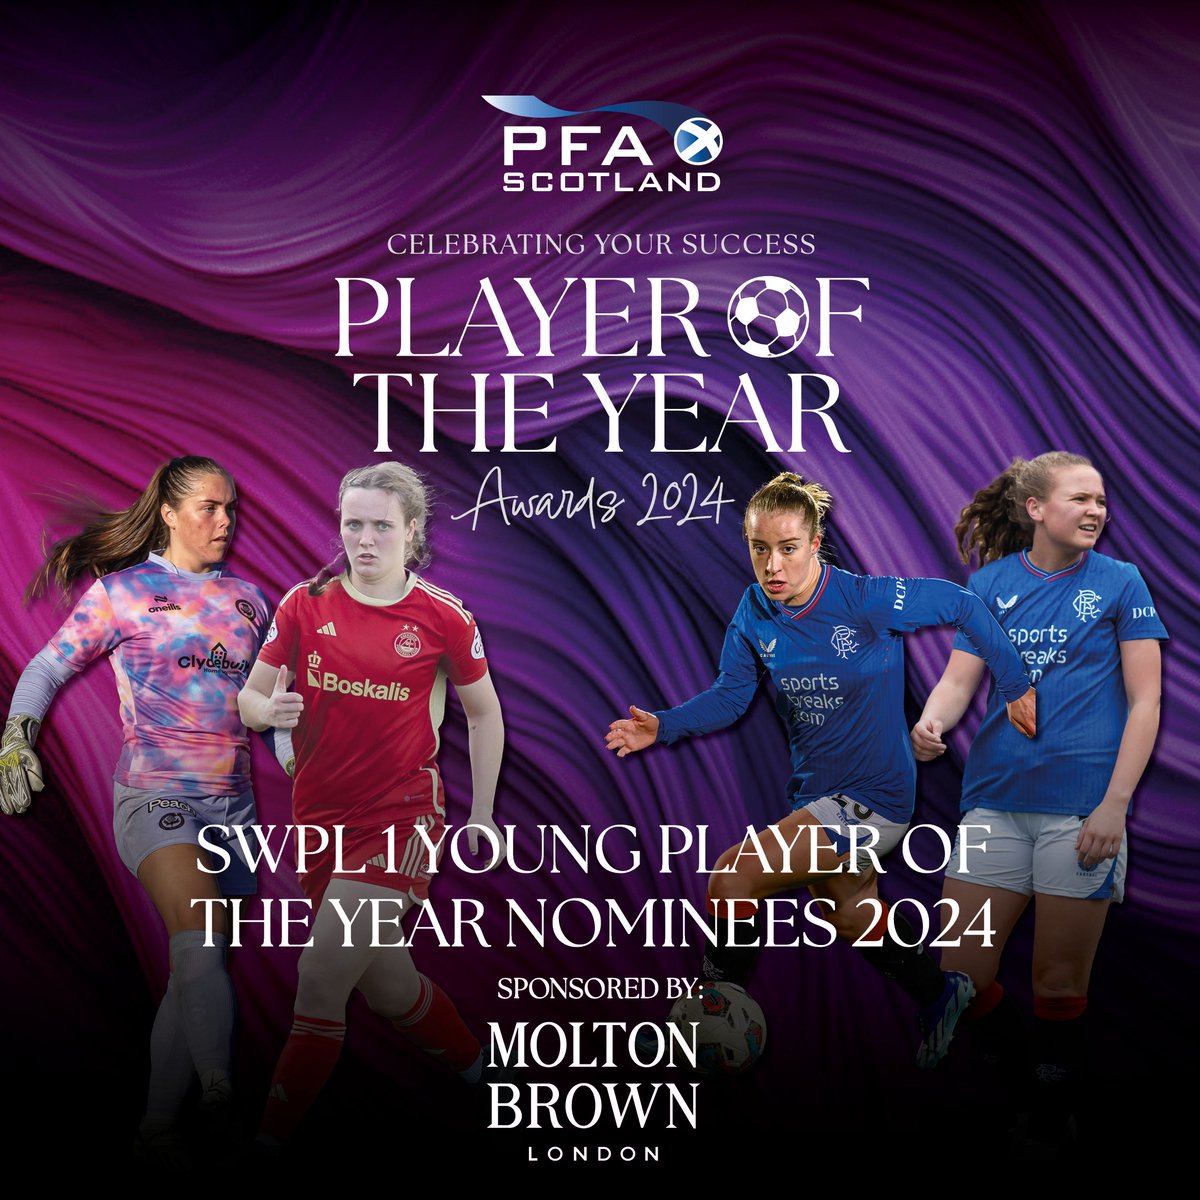 PFA Scotland SWPL1 Young Player of the Year Nominees, sponsored by @MoltonBrownUK 🏆 As voted by the players... Ava Eadson - @ThistleWFC Bayley Hutchison - @AberdeenWomen Kirsty Maclean - @RangersWFC Mia McAulay - @RangersWFC #PFASAwards